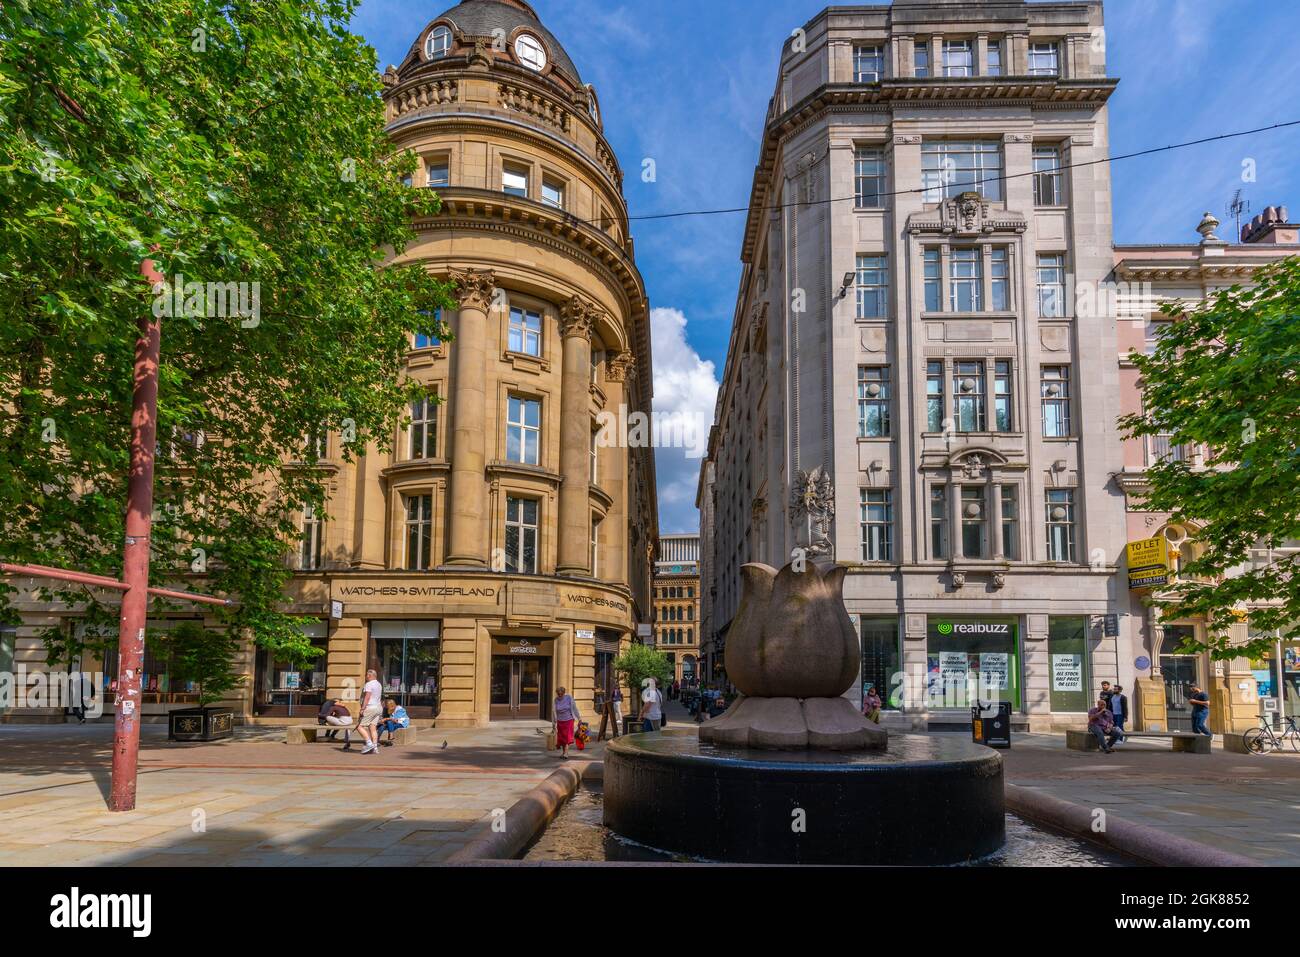 View of buildings in St Anne's Square, Manchester, Lancashire, England, United Kingdom, Europe Stock Photo